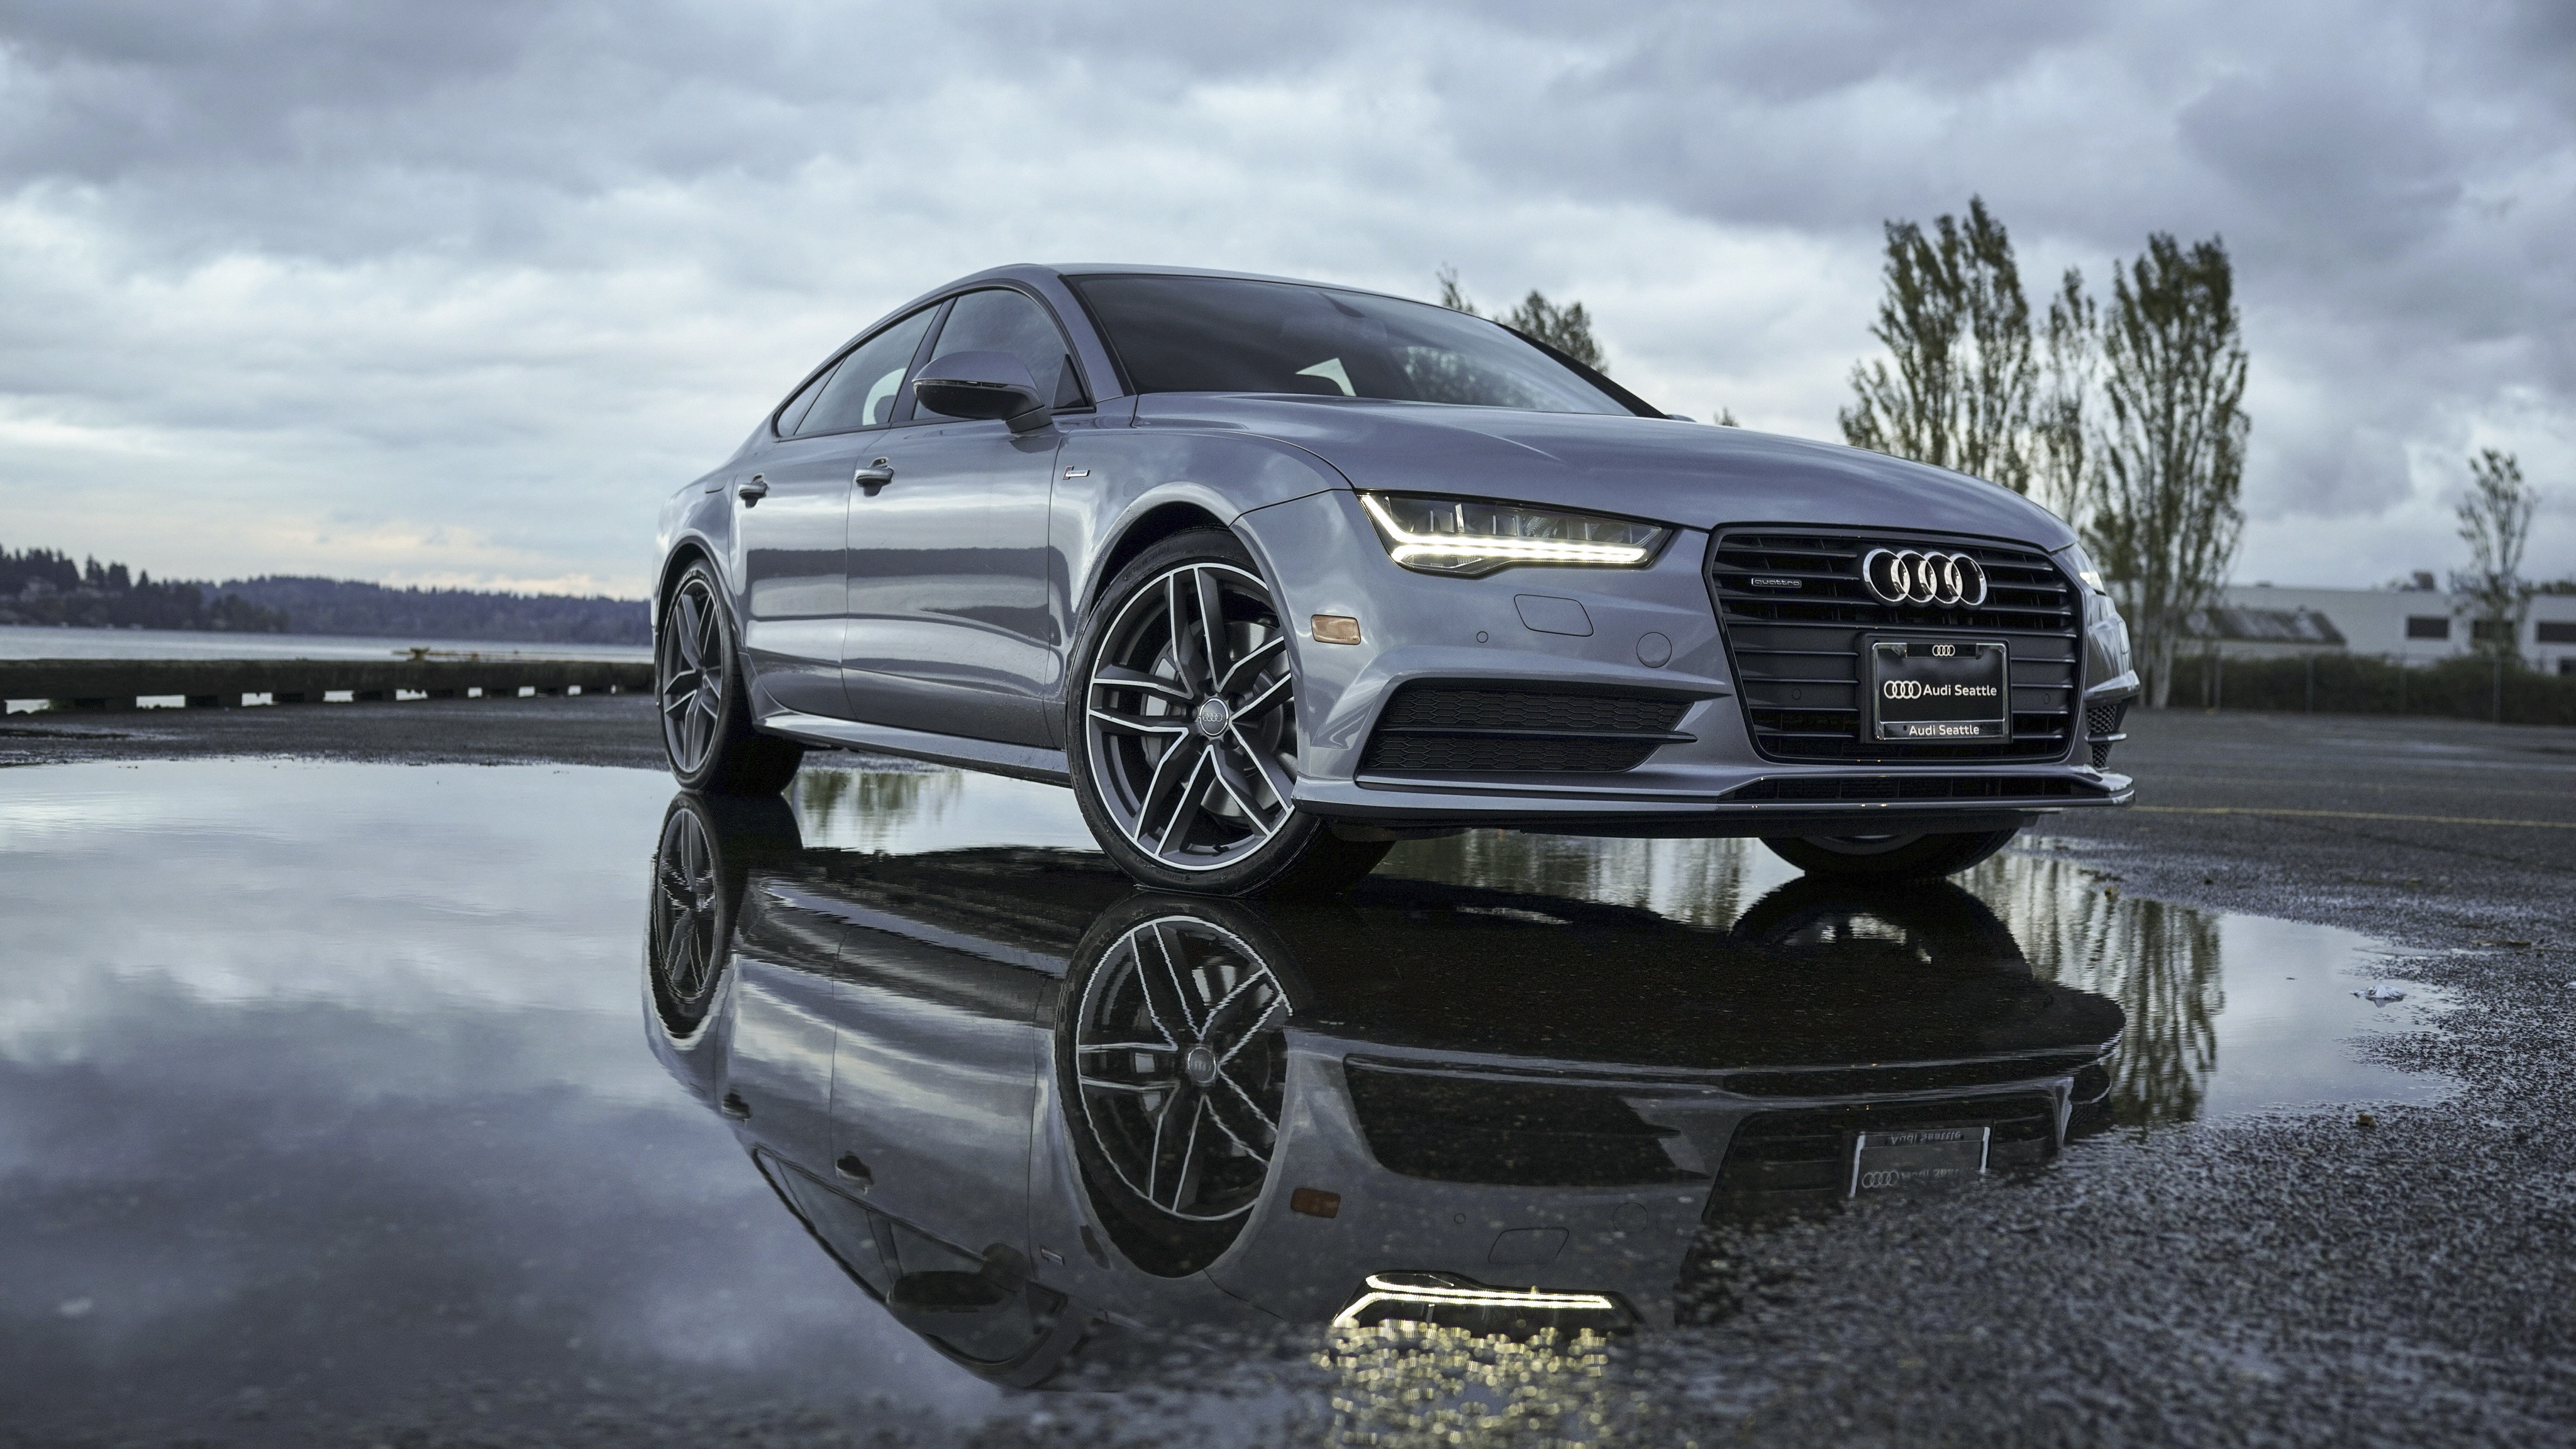 Your Ridiculously Awesome Audi A7 Wallpaper Is Here